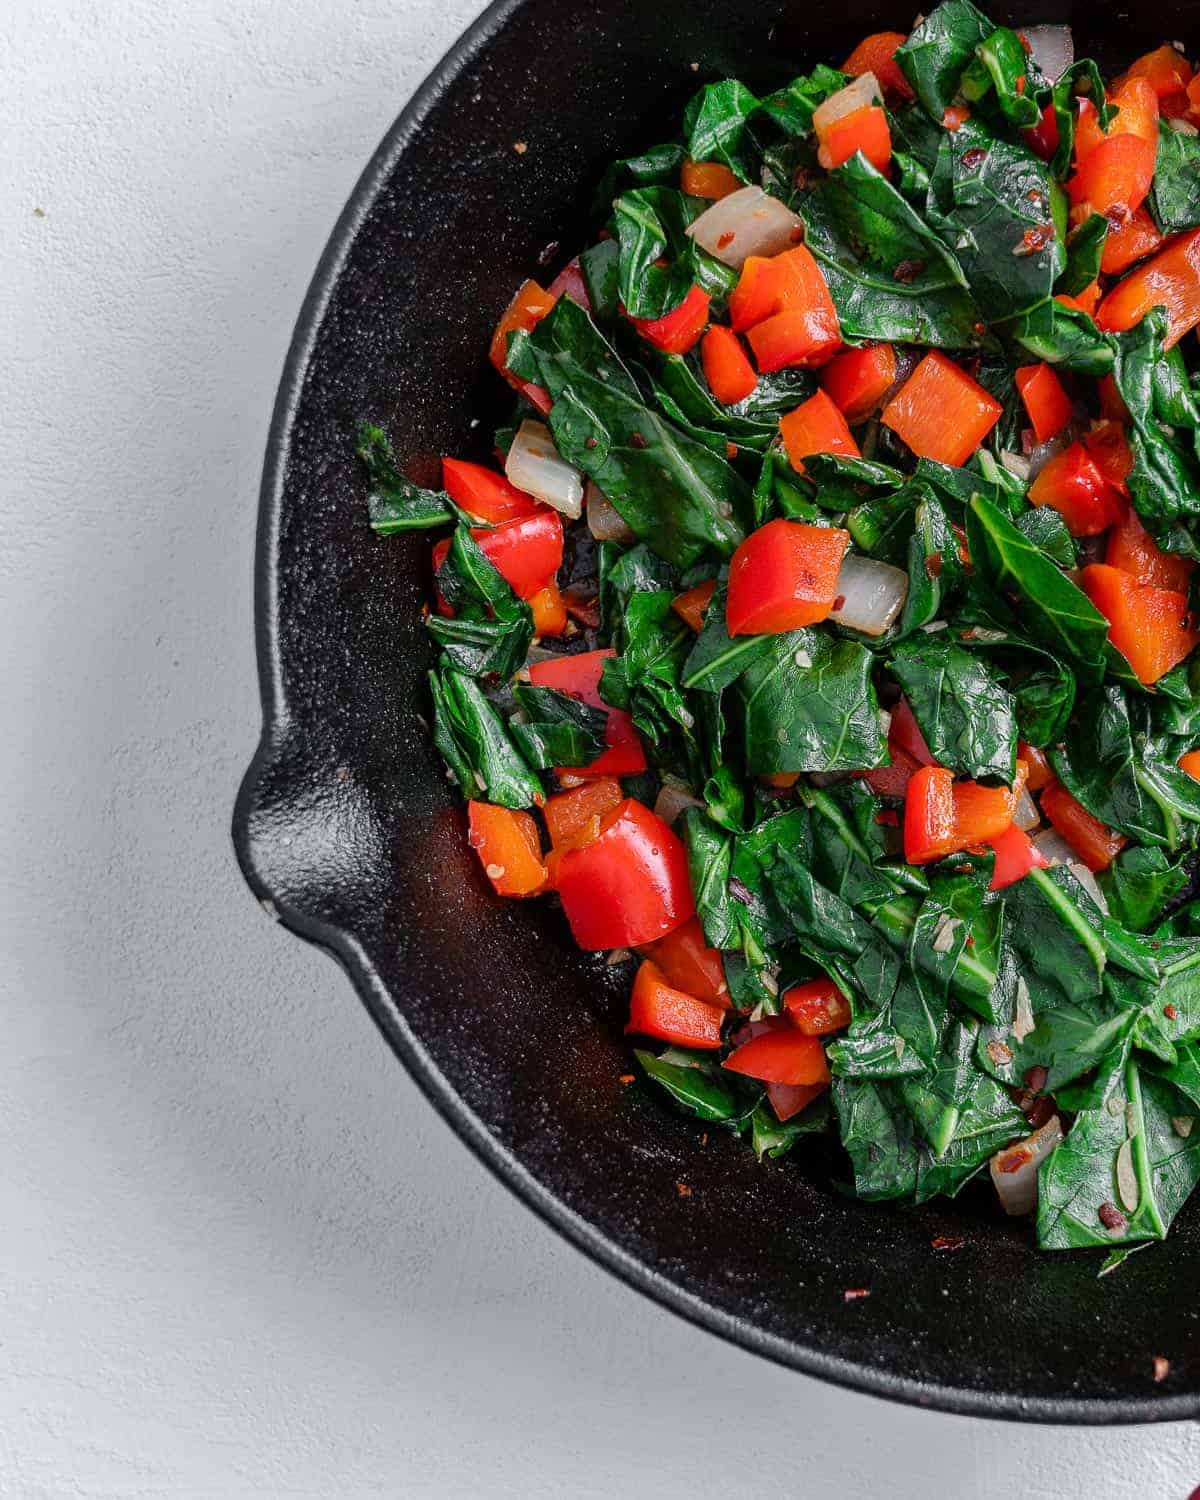 completed Spicy Collard Greens in a black pan against a white surface